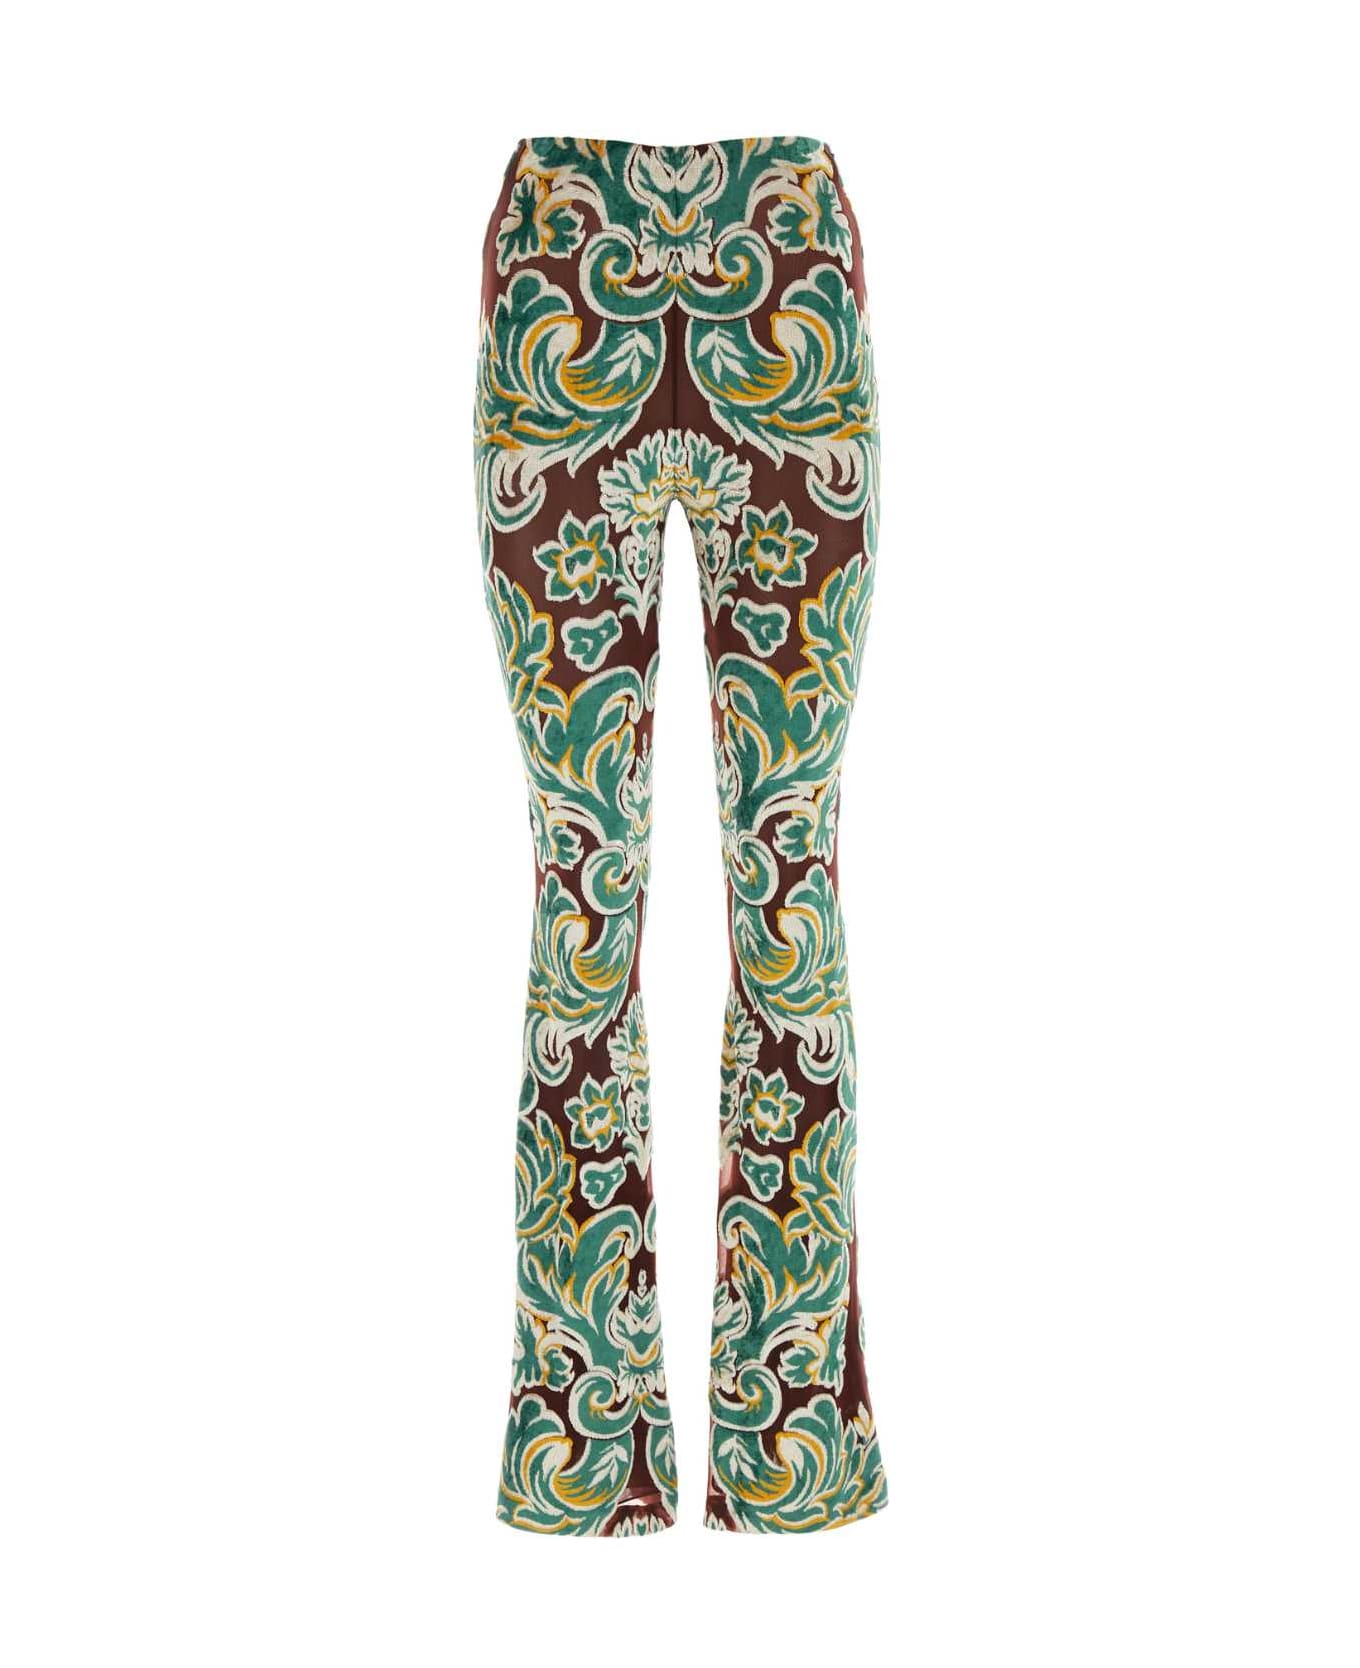 Etro Embroidered Jacquard Pant - S9865 ボトムス